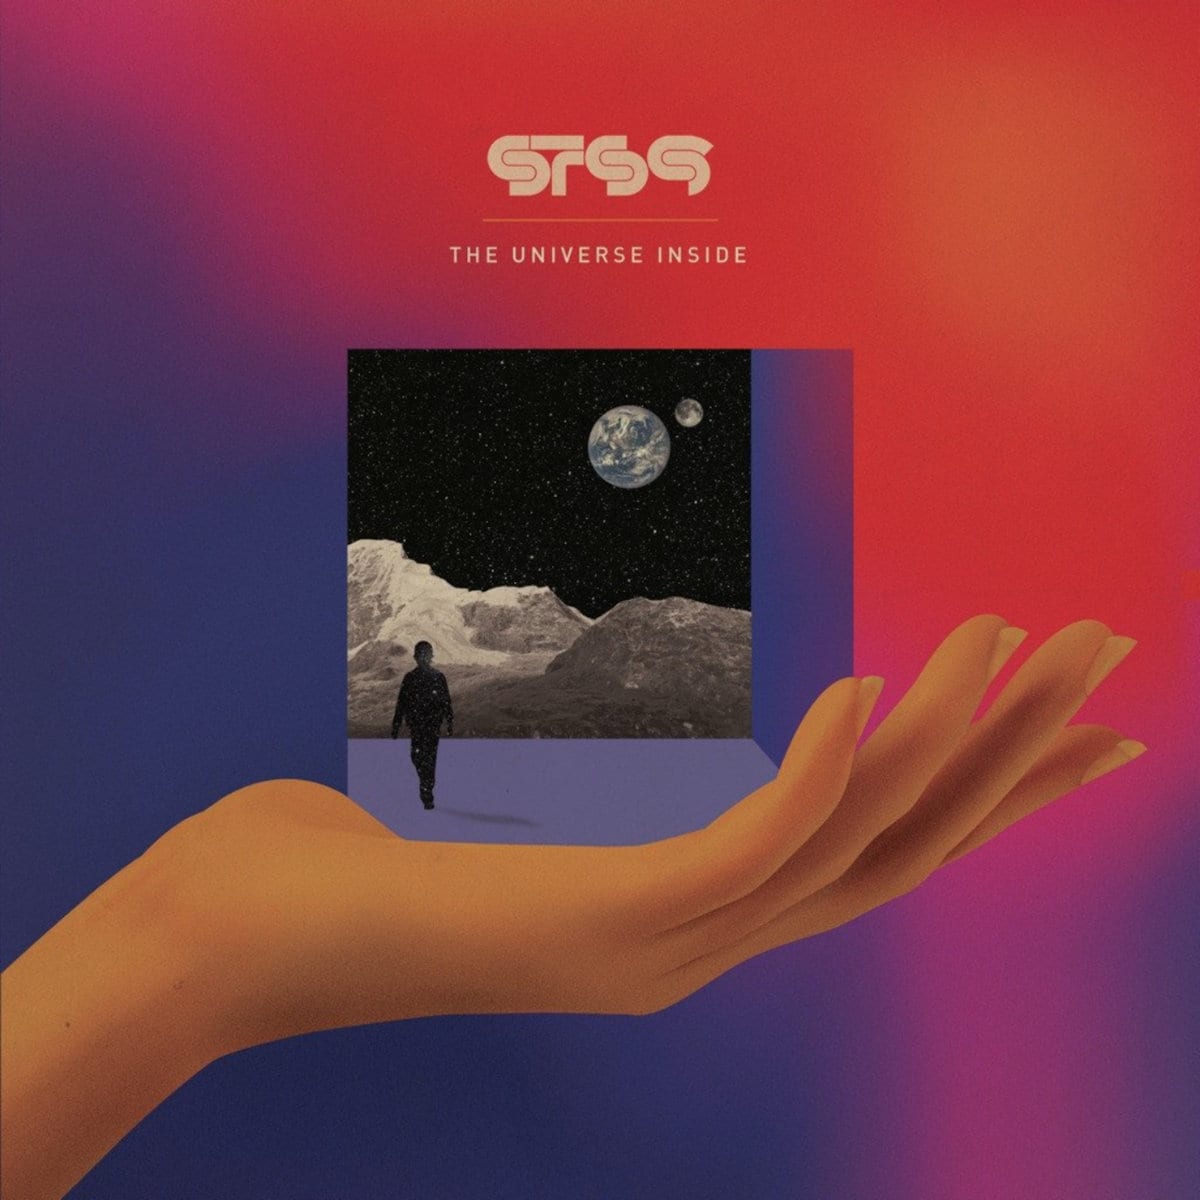 STS9 The Universe Inside art